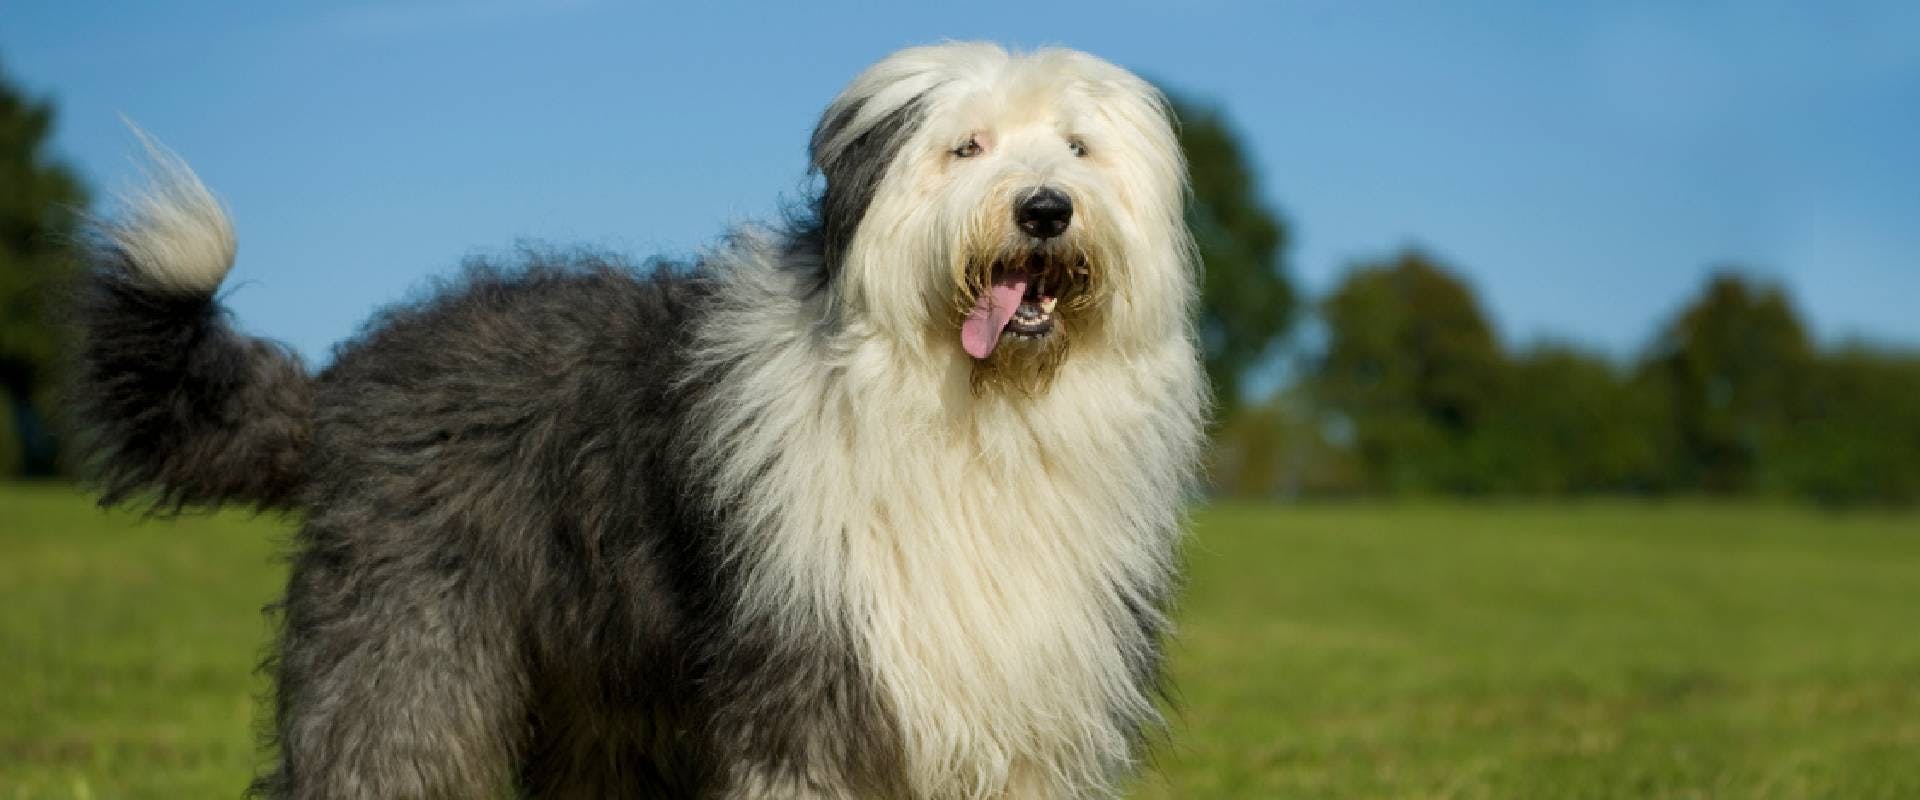 Old English Sheepdog standing in a field